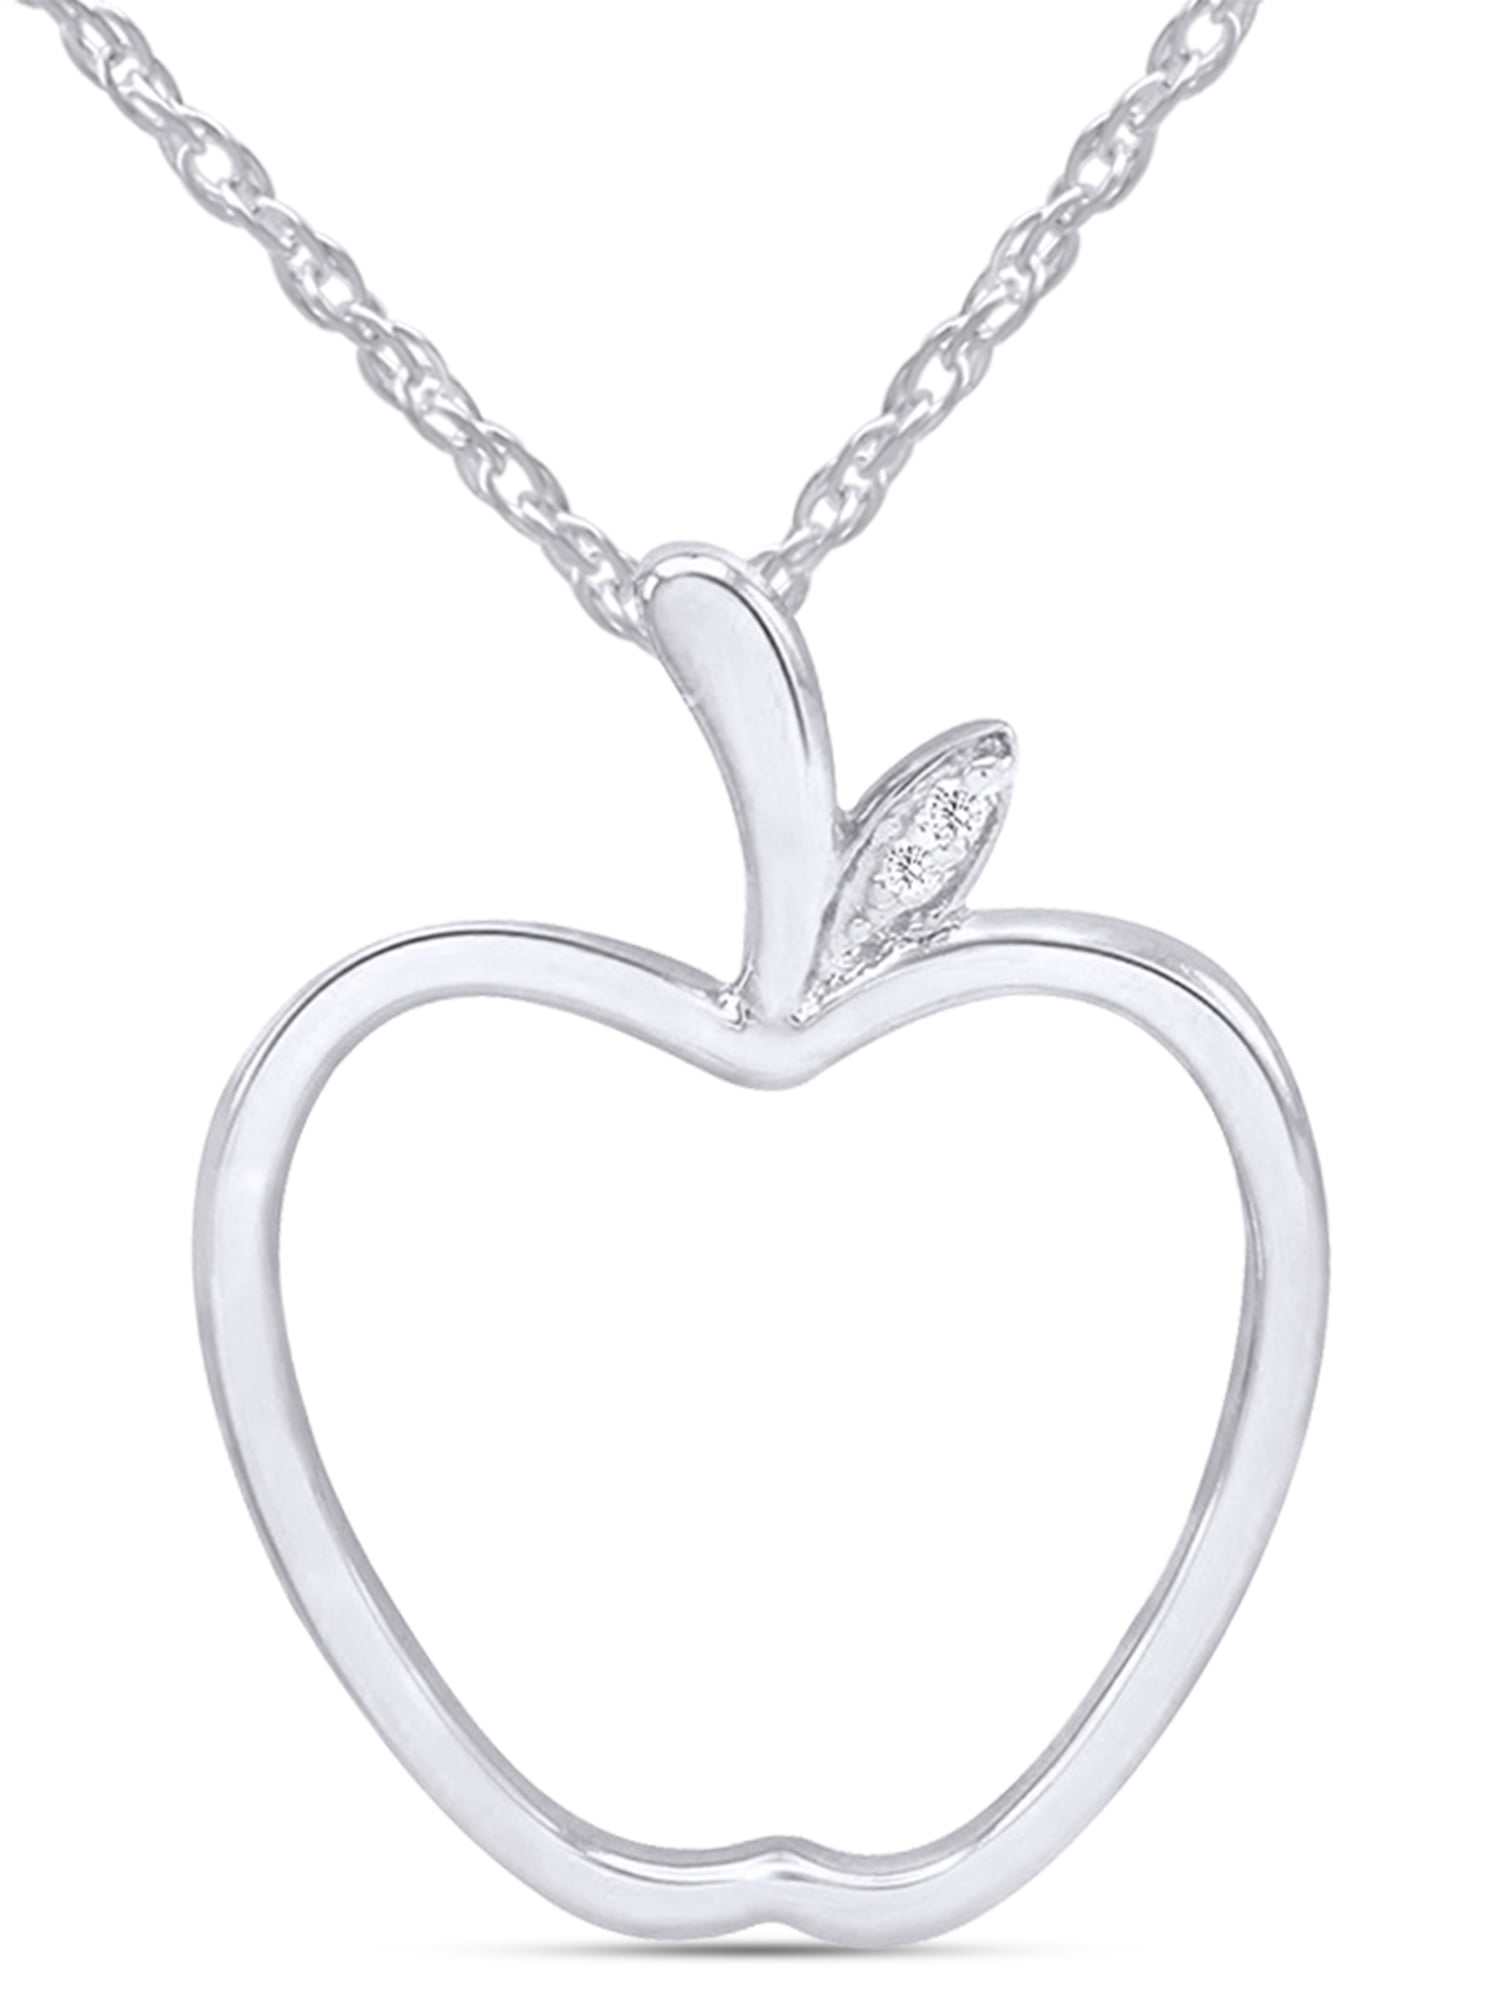 Wishrocks Round Simulated Cubic Zirconia Charm Love Heart Necklace in 14k Gold Over Sterling Silver